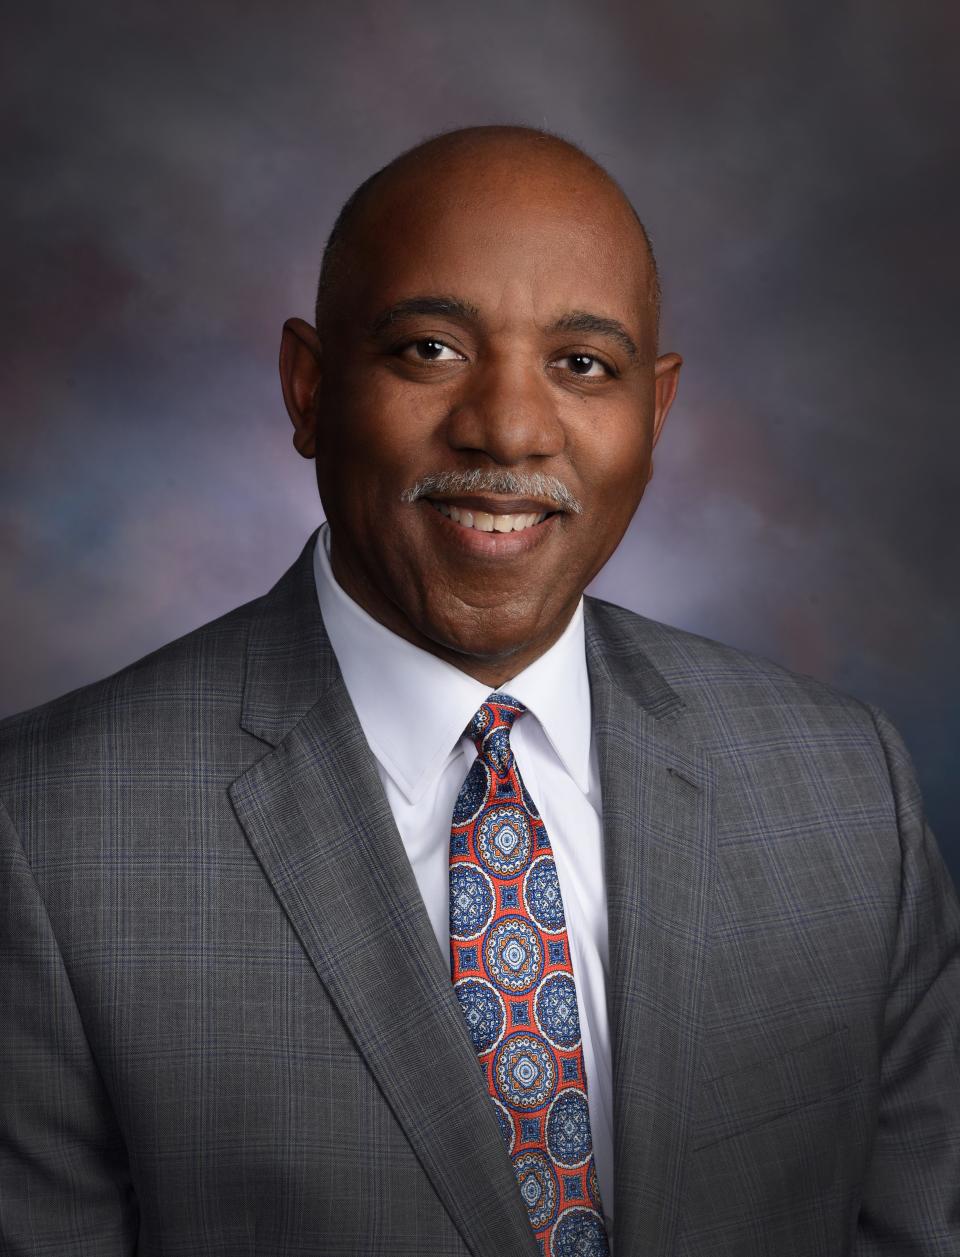 Dr. Marvin Connelly Jr. is the superintendent of Cumberland County Schools.